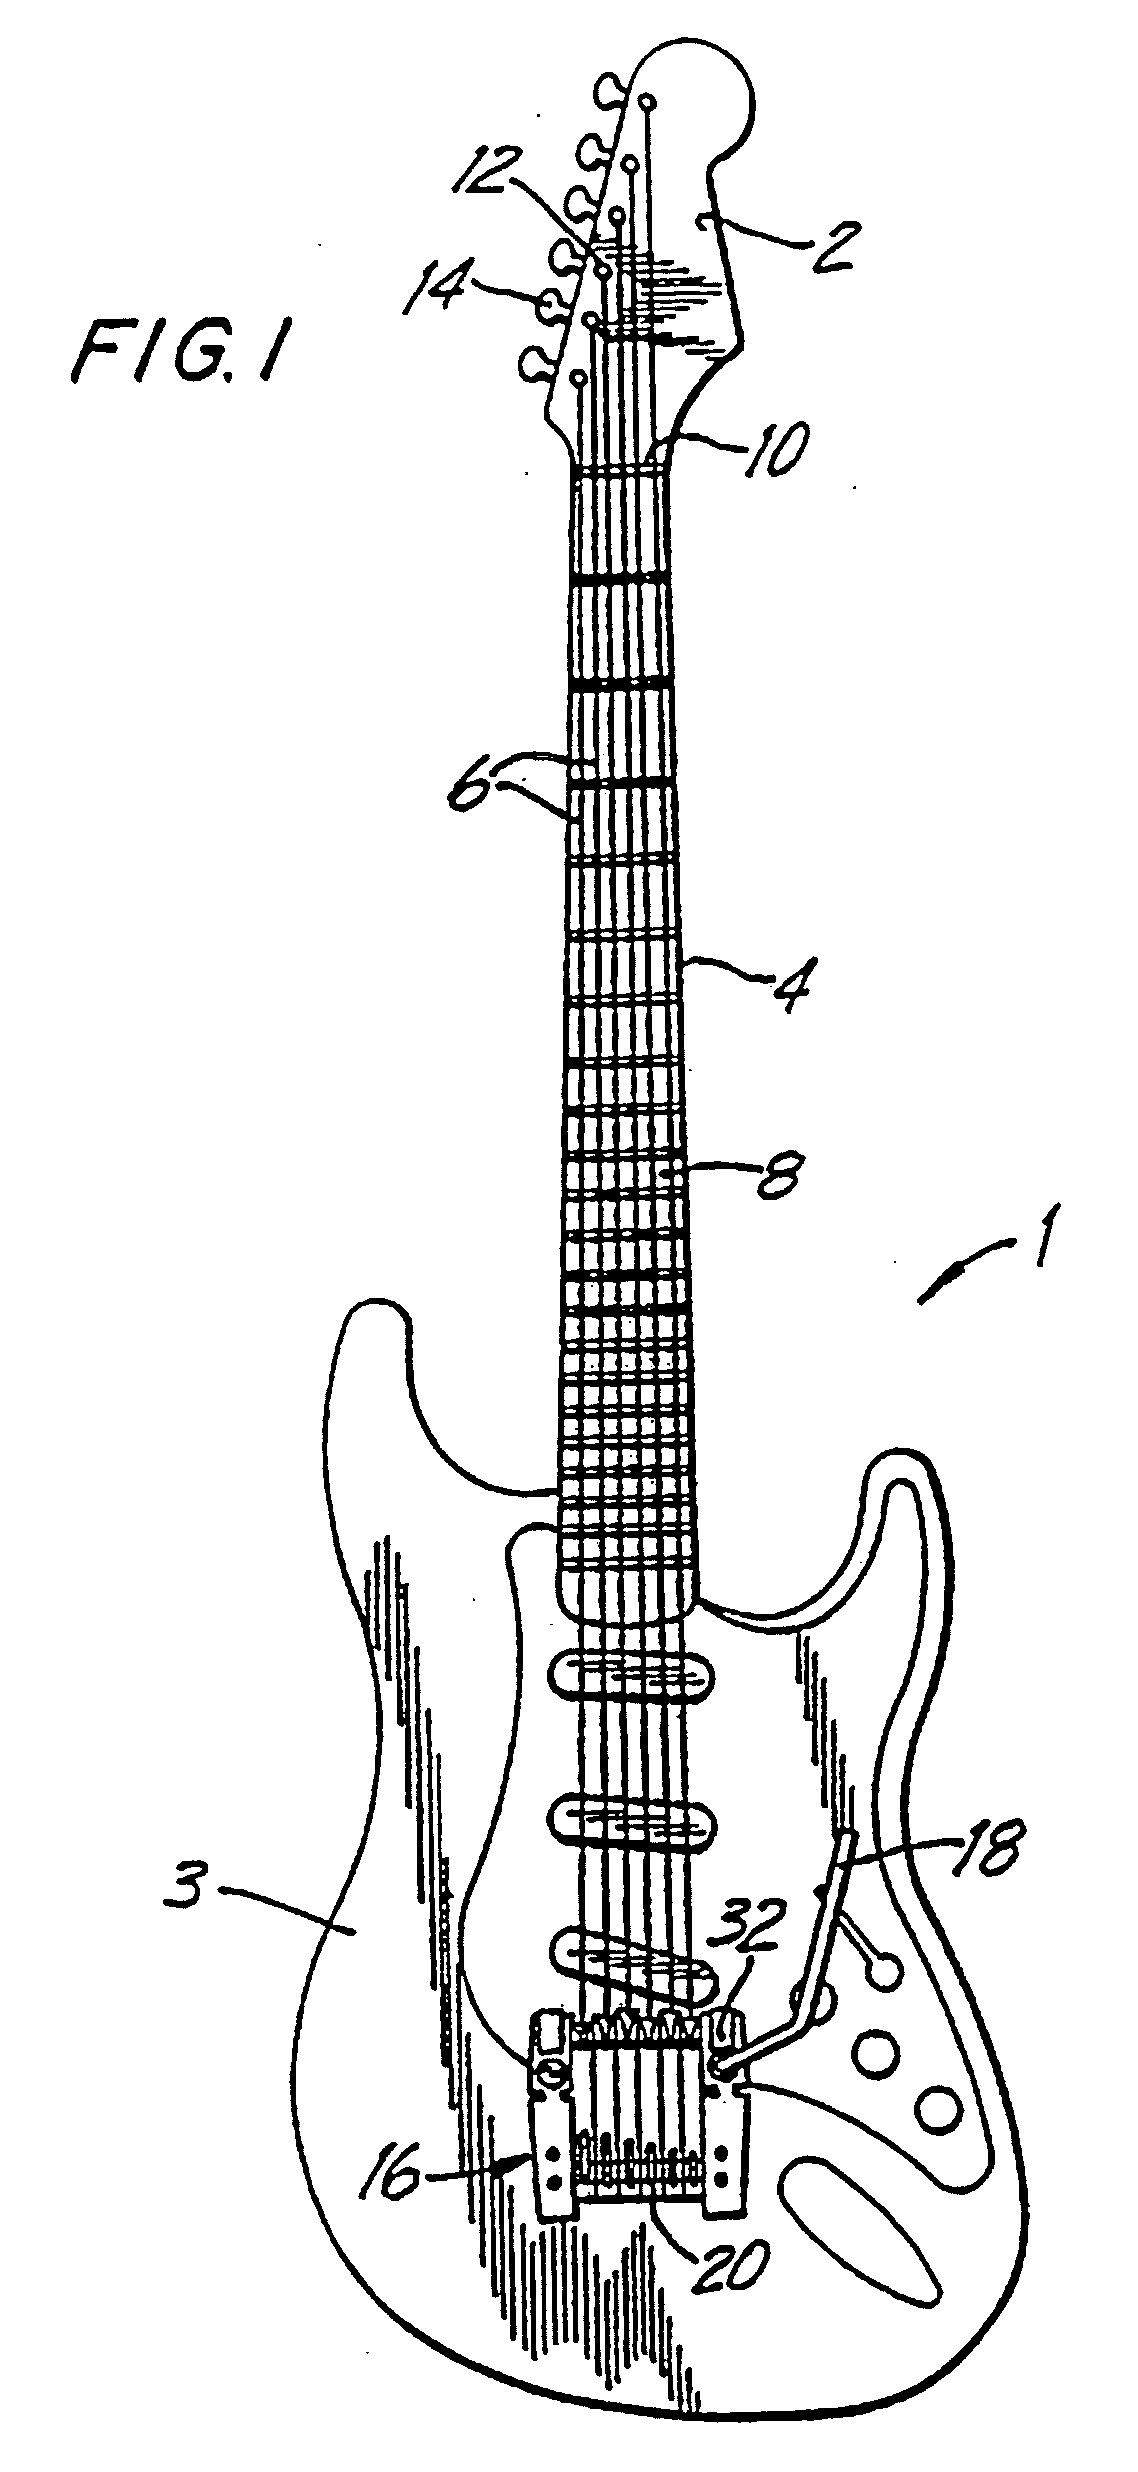 Systems, methods and apparatus for a stringed musical instrument